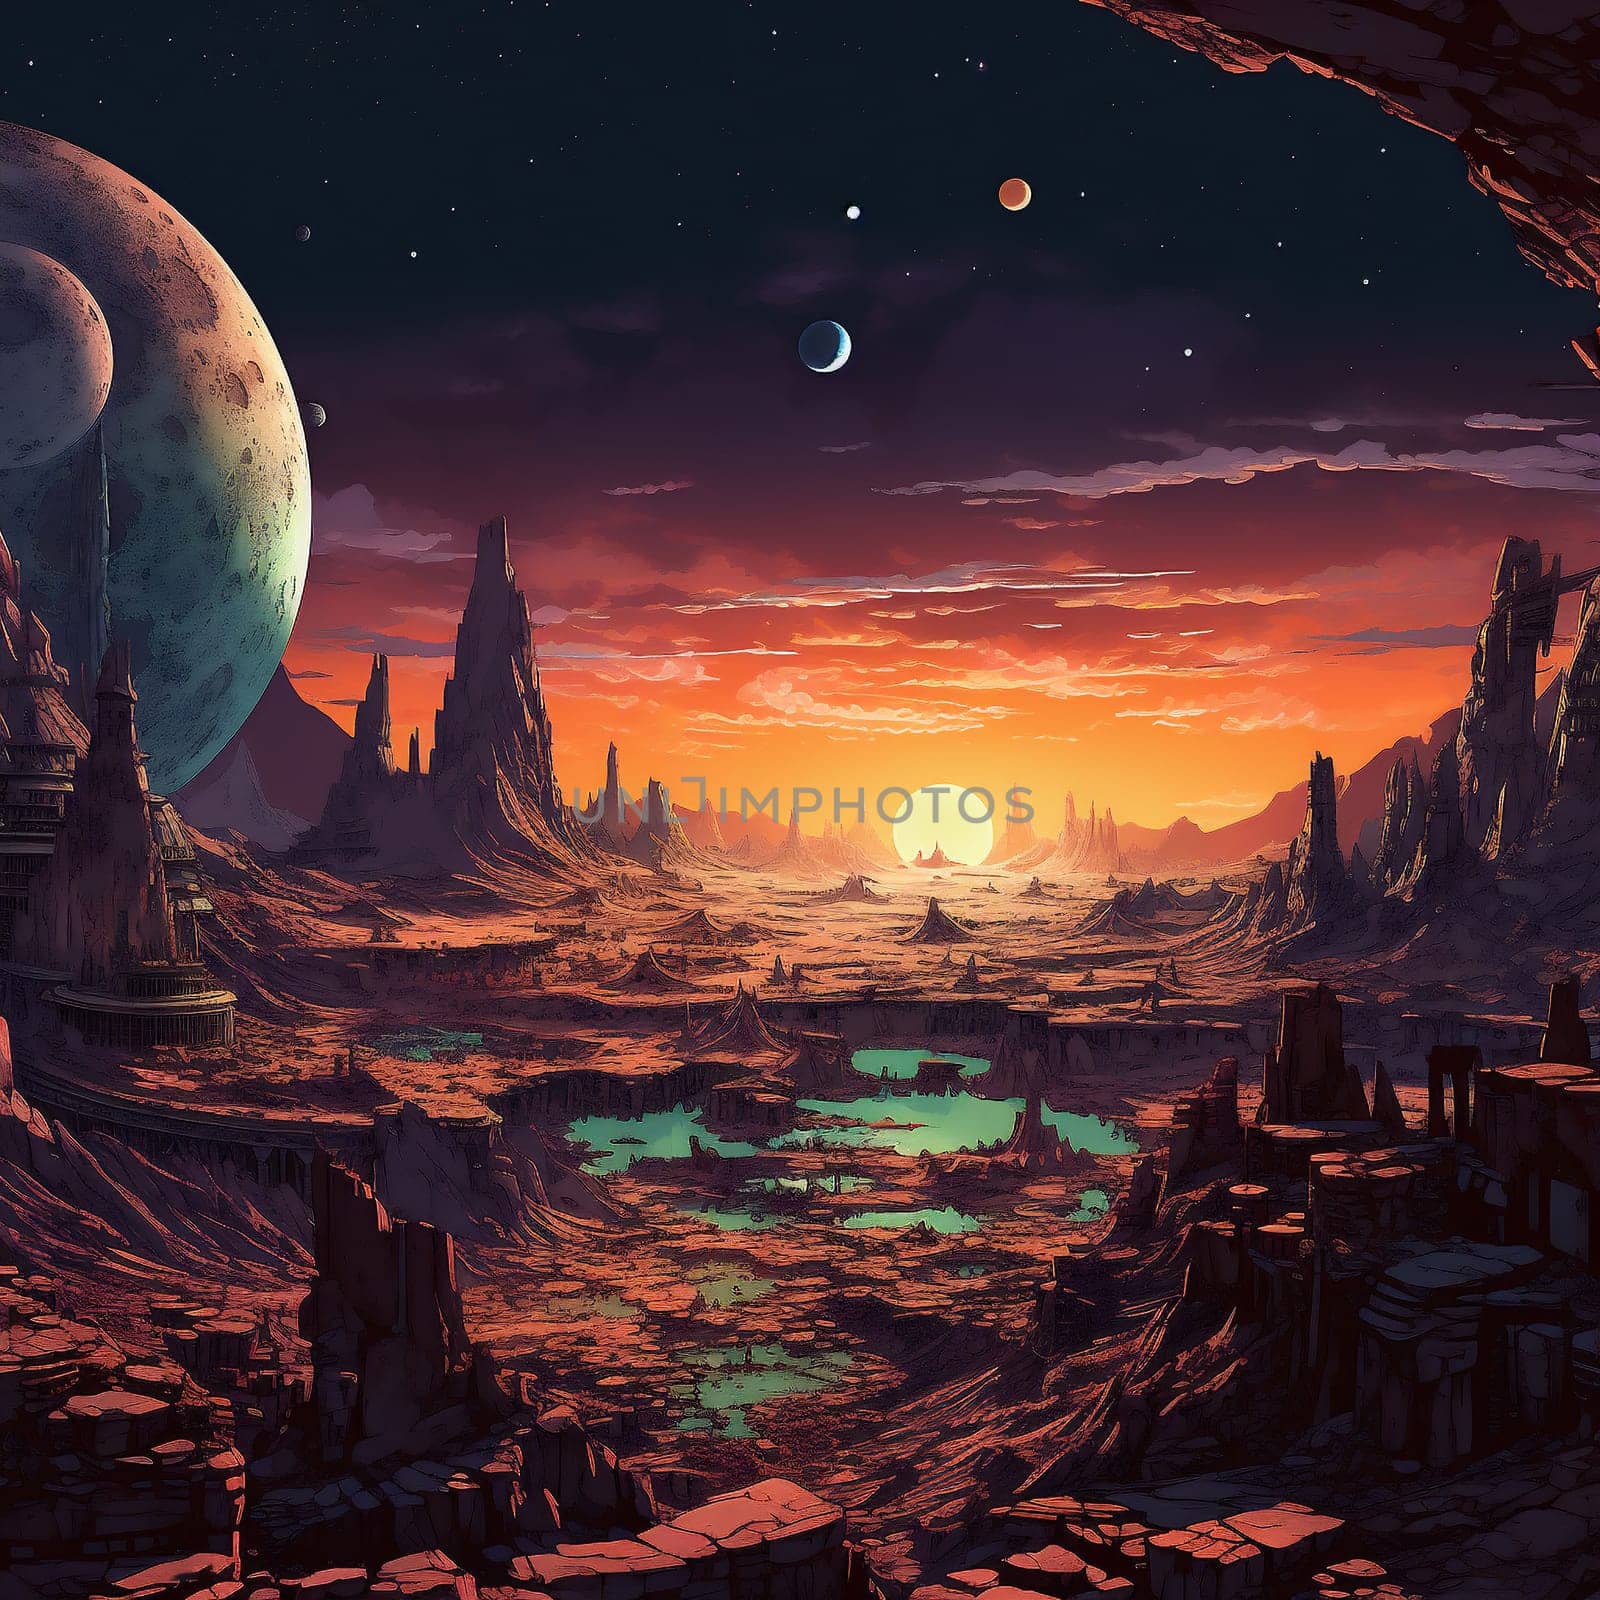 Space background, World collapse, Doomsday Scene Concept Illustration. Video Game's Digital CG Artwork, Concept Illustration with Ruins. Destroyed City against the Backdrop of Sunset. Huge Yellow Sun in the Red Sky,